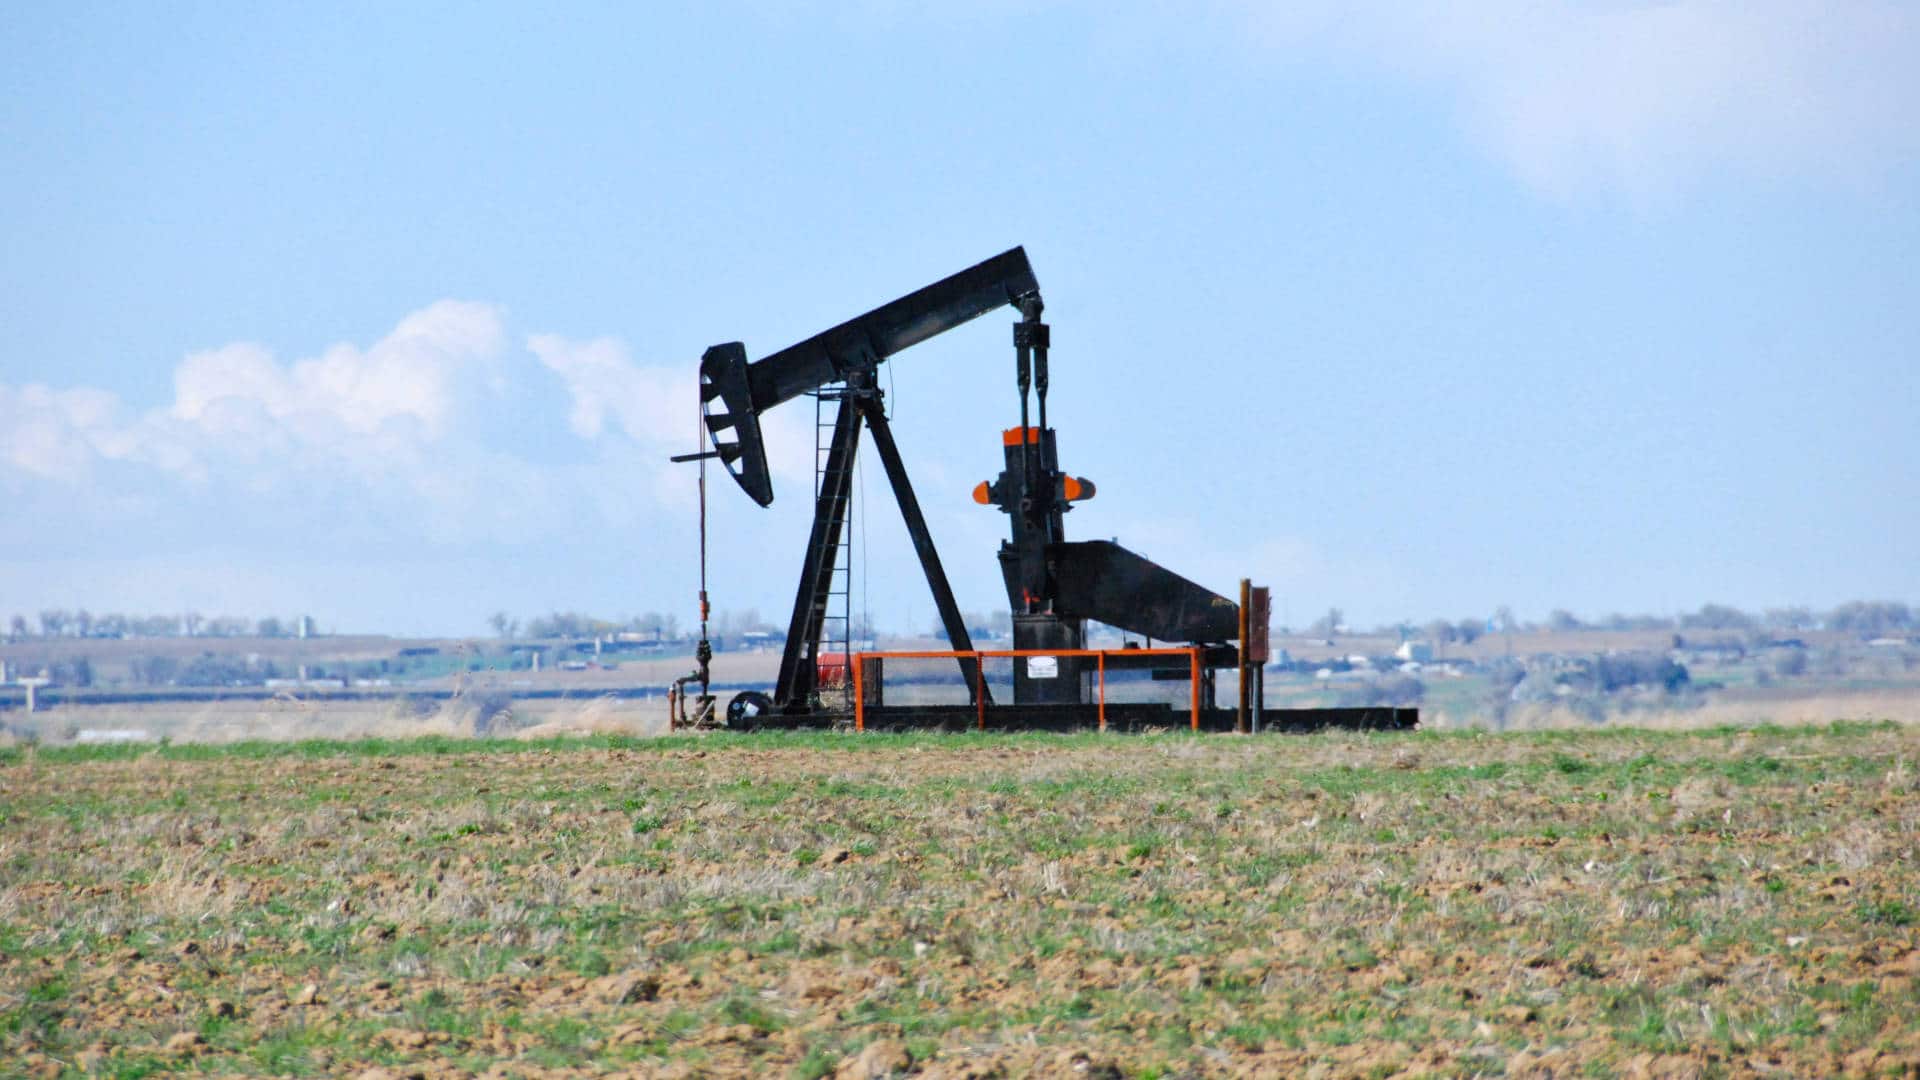 A pump jack extracts oil from a well near Johnstown, Colorado.